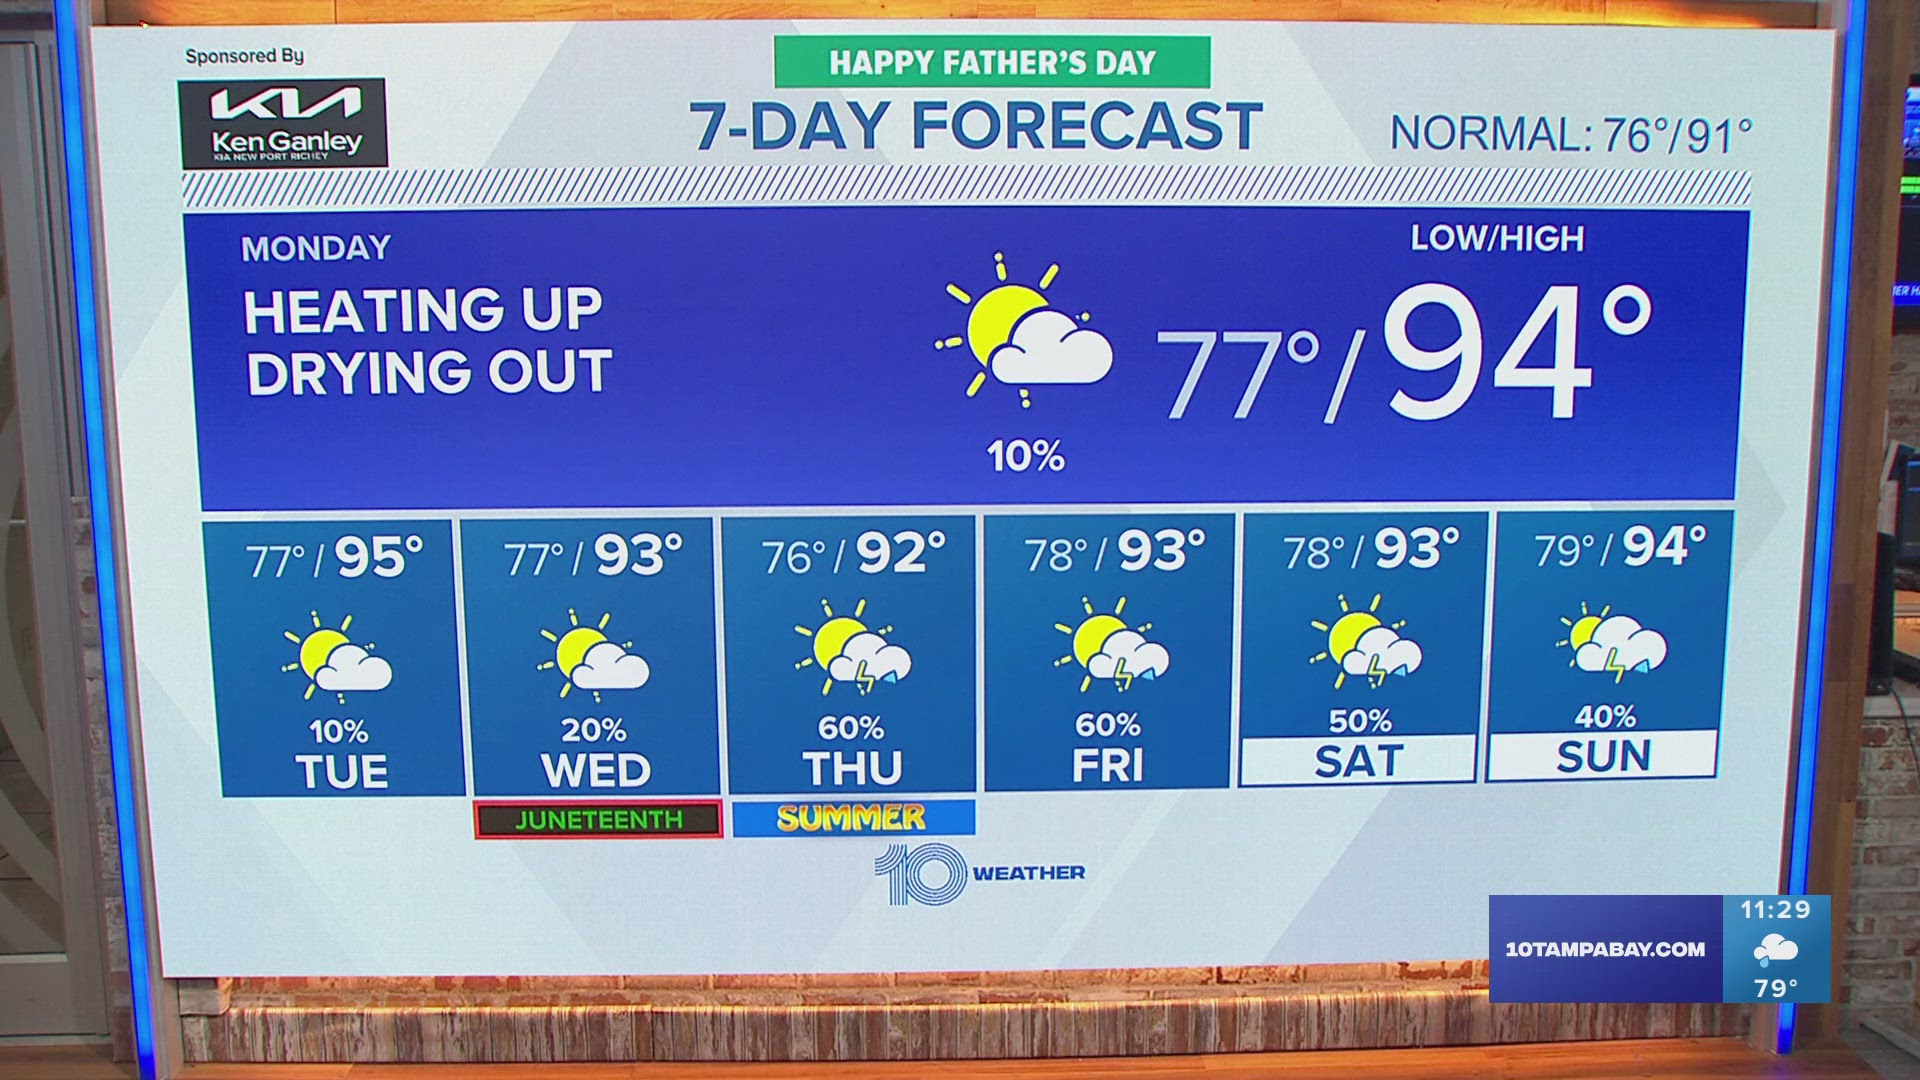 10 Tampa Bay Meteorologist Colleen Campbell has the latest forecast for the Tampa Bay area.